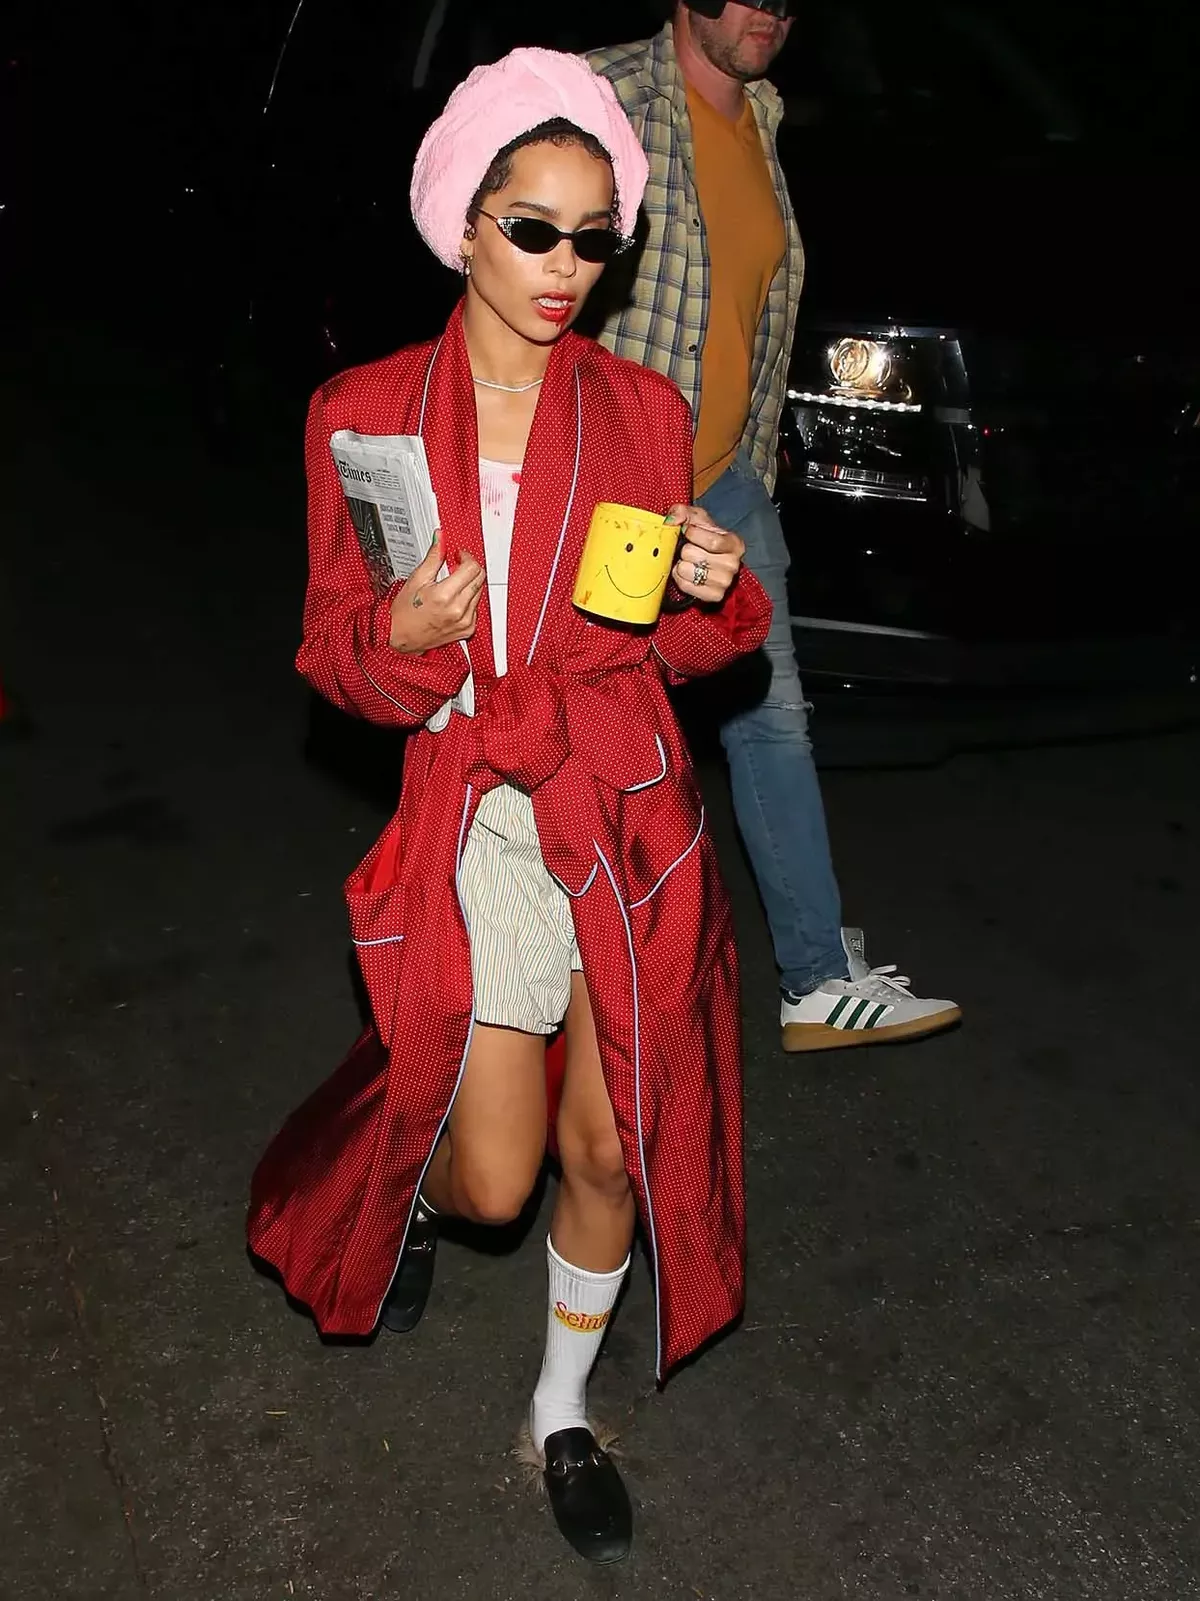 Zoë Kravitz dressed as a morning look with a vampiric twist.